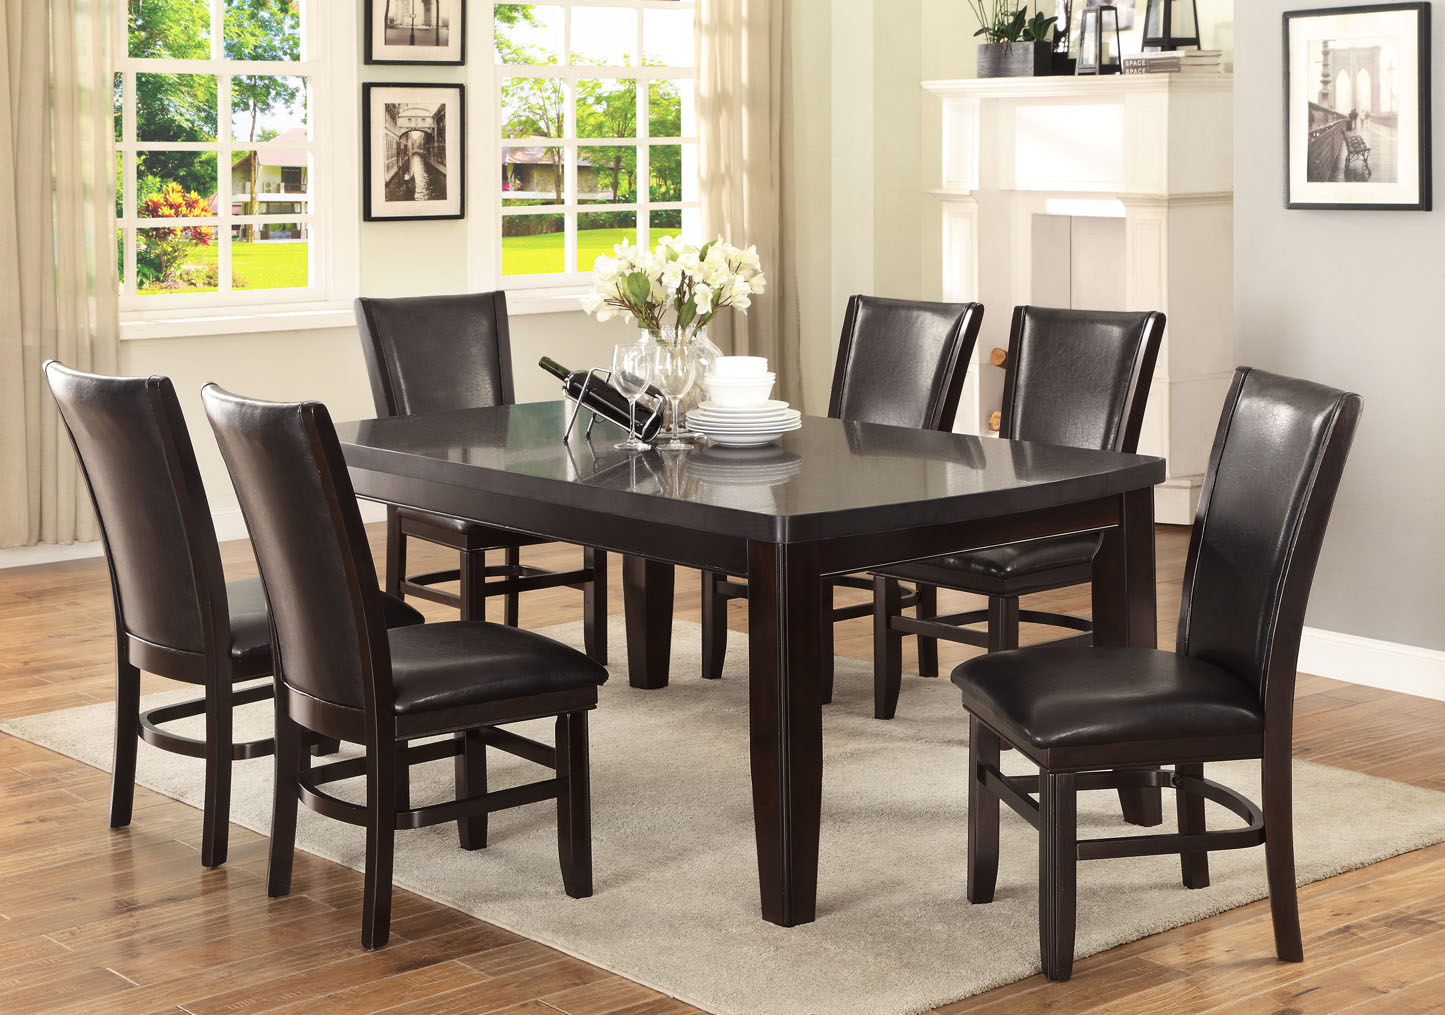 GL-4811 Carom Dining Table